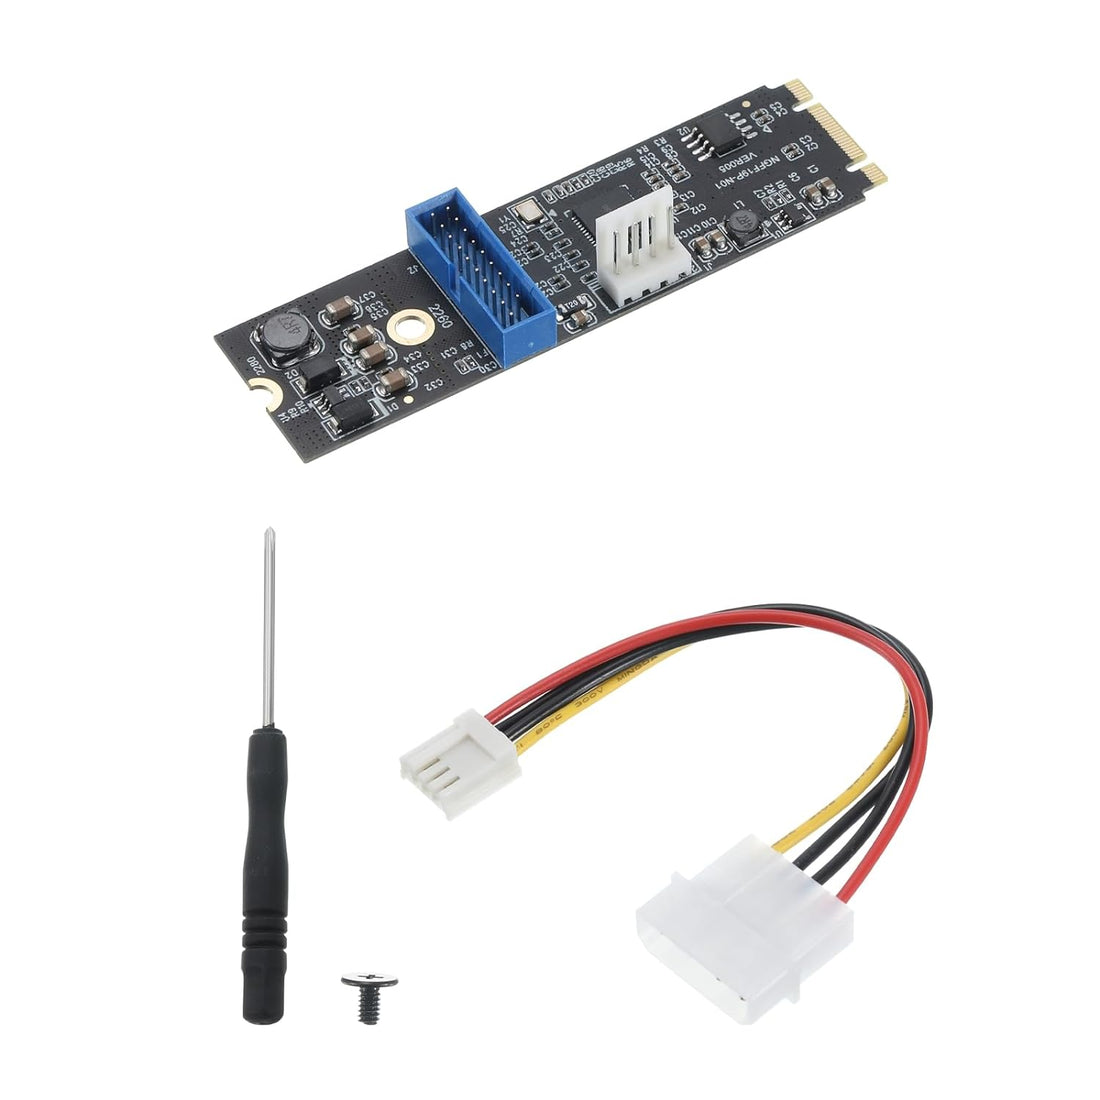 MECCANIXITY M.2 PCI-E to USB3.0 19Pin Front Panel Socket Adapter Board Express Card for Desktop, PC, Office Computer